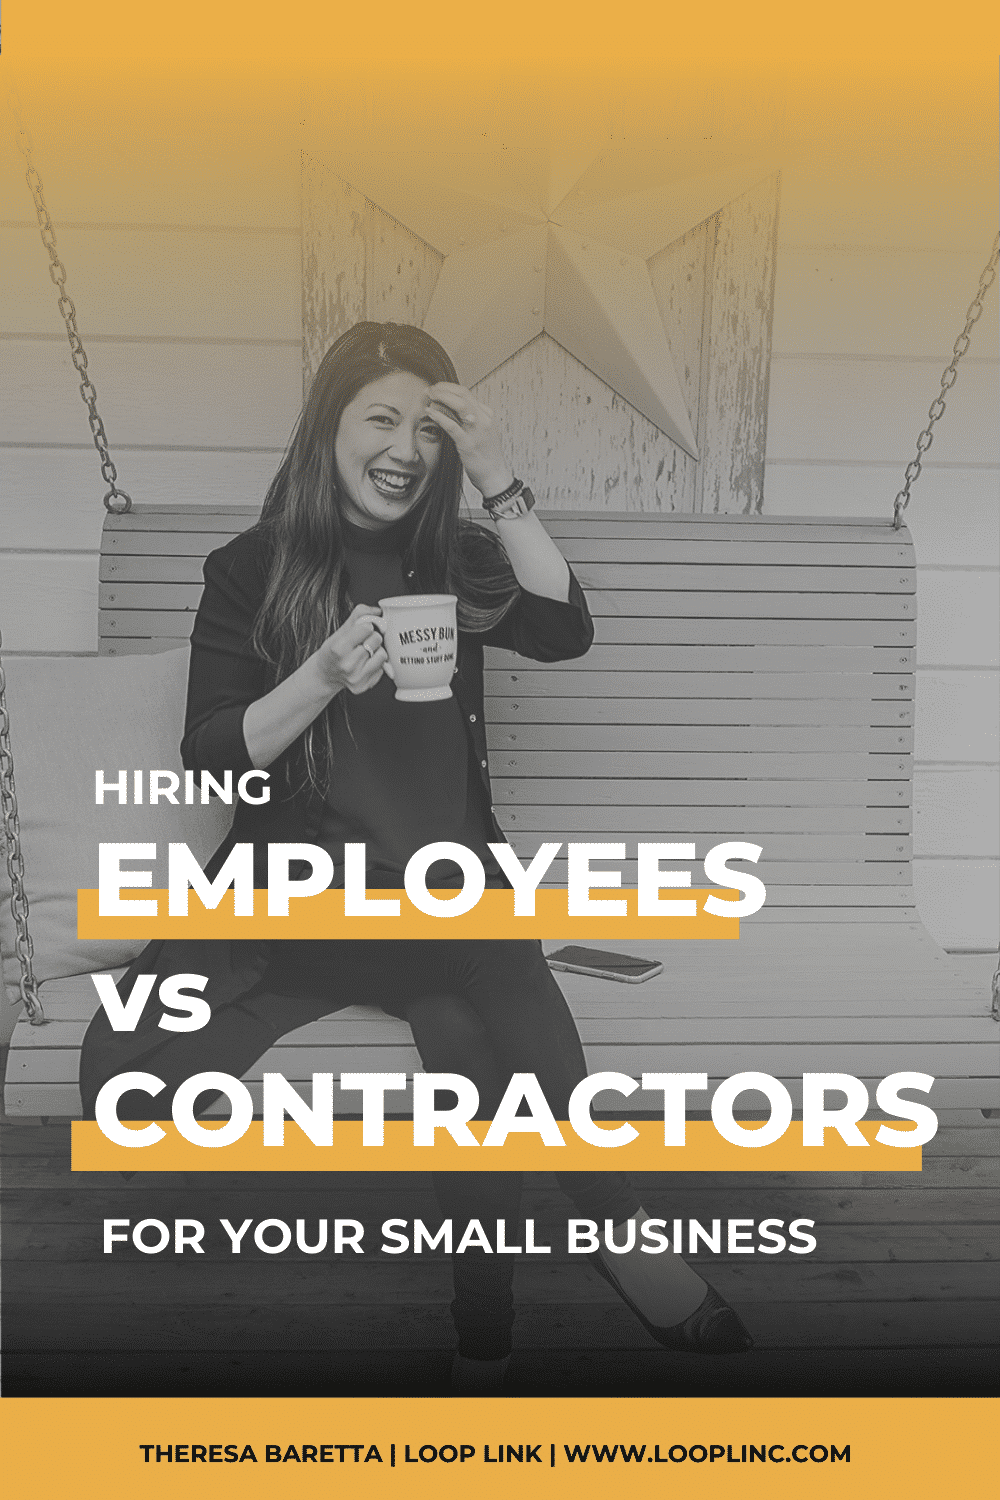 Hiring Employees vs Contractors for Your Small Business